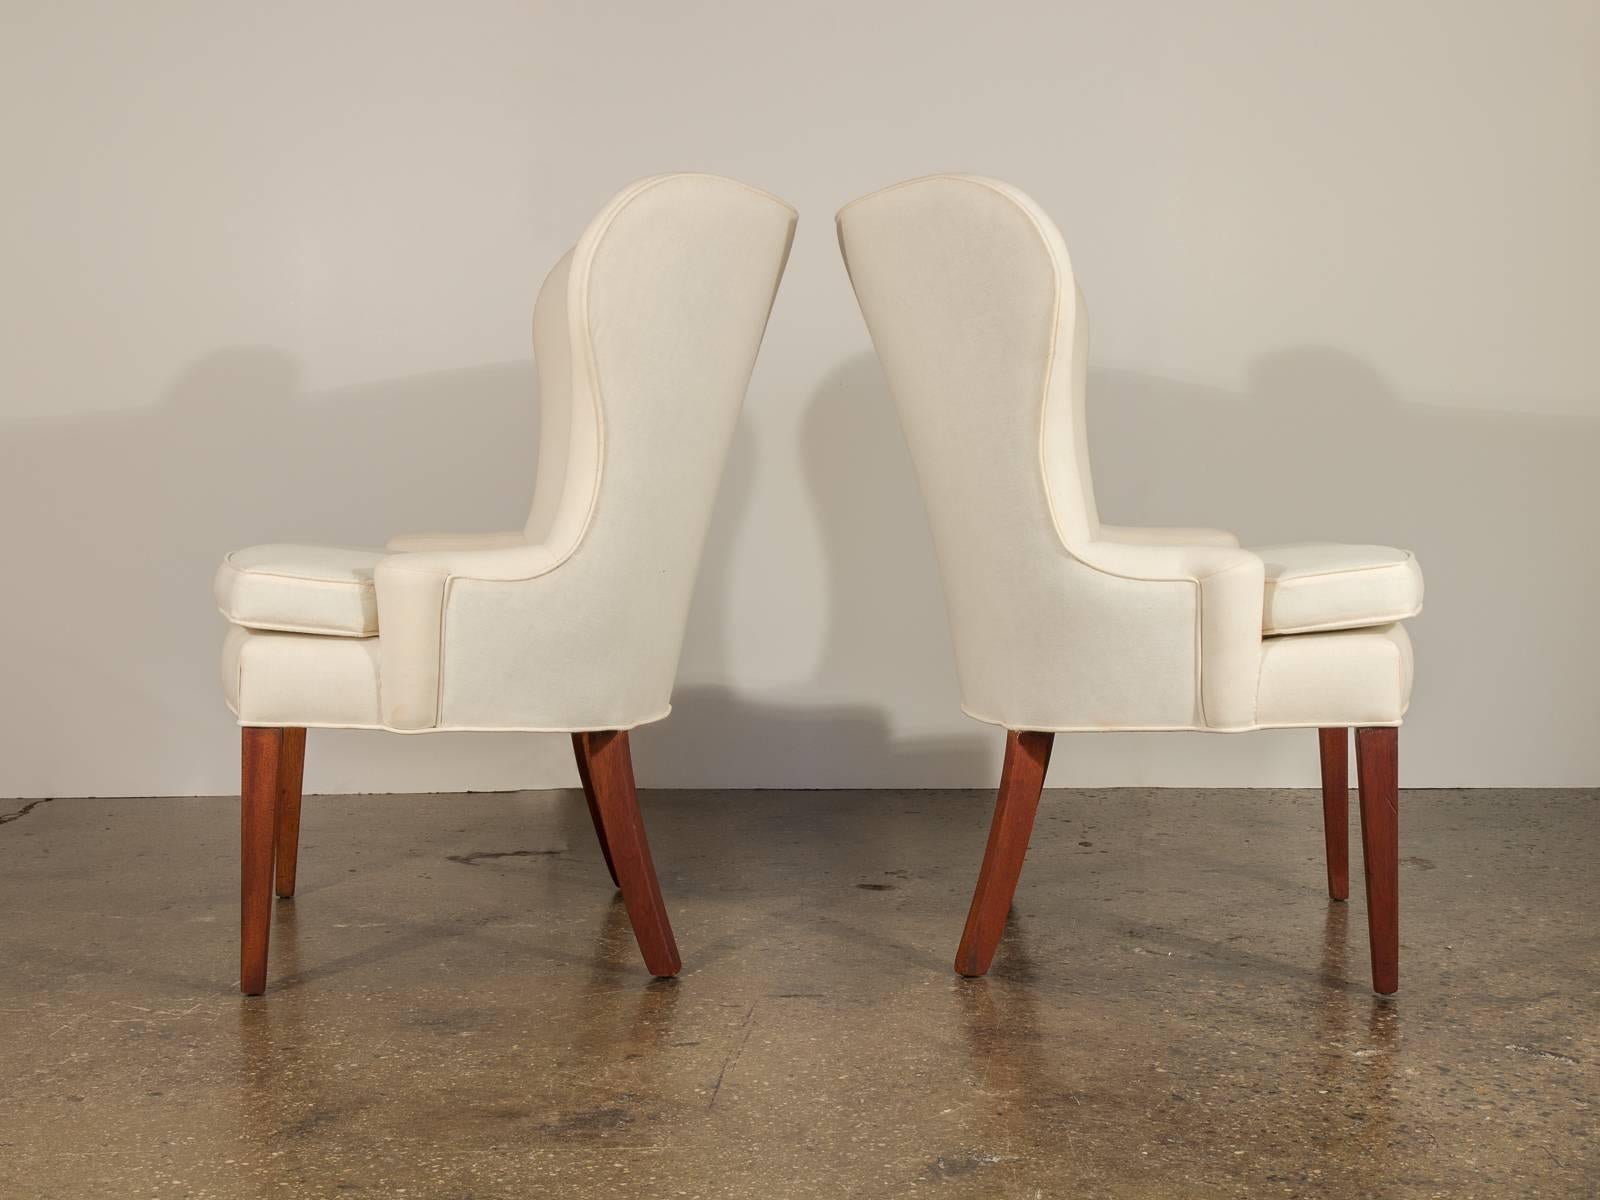 A generous shape and clean-cut modernist lines create a fantastic form for the mid-century connoisseur. The chairs are upholstered in muslin so that their pure lines may be readily appreciated; we recommend covering them in a fabric of your